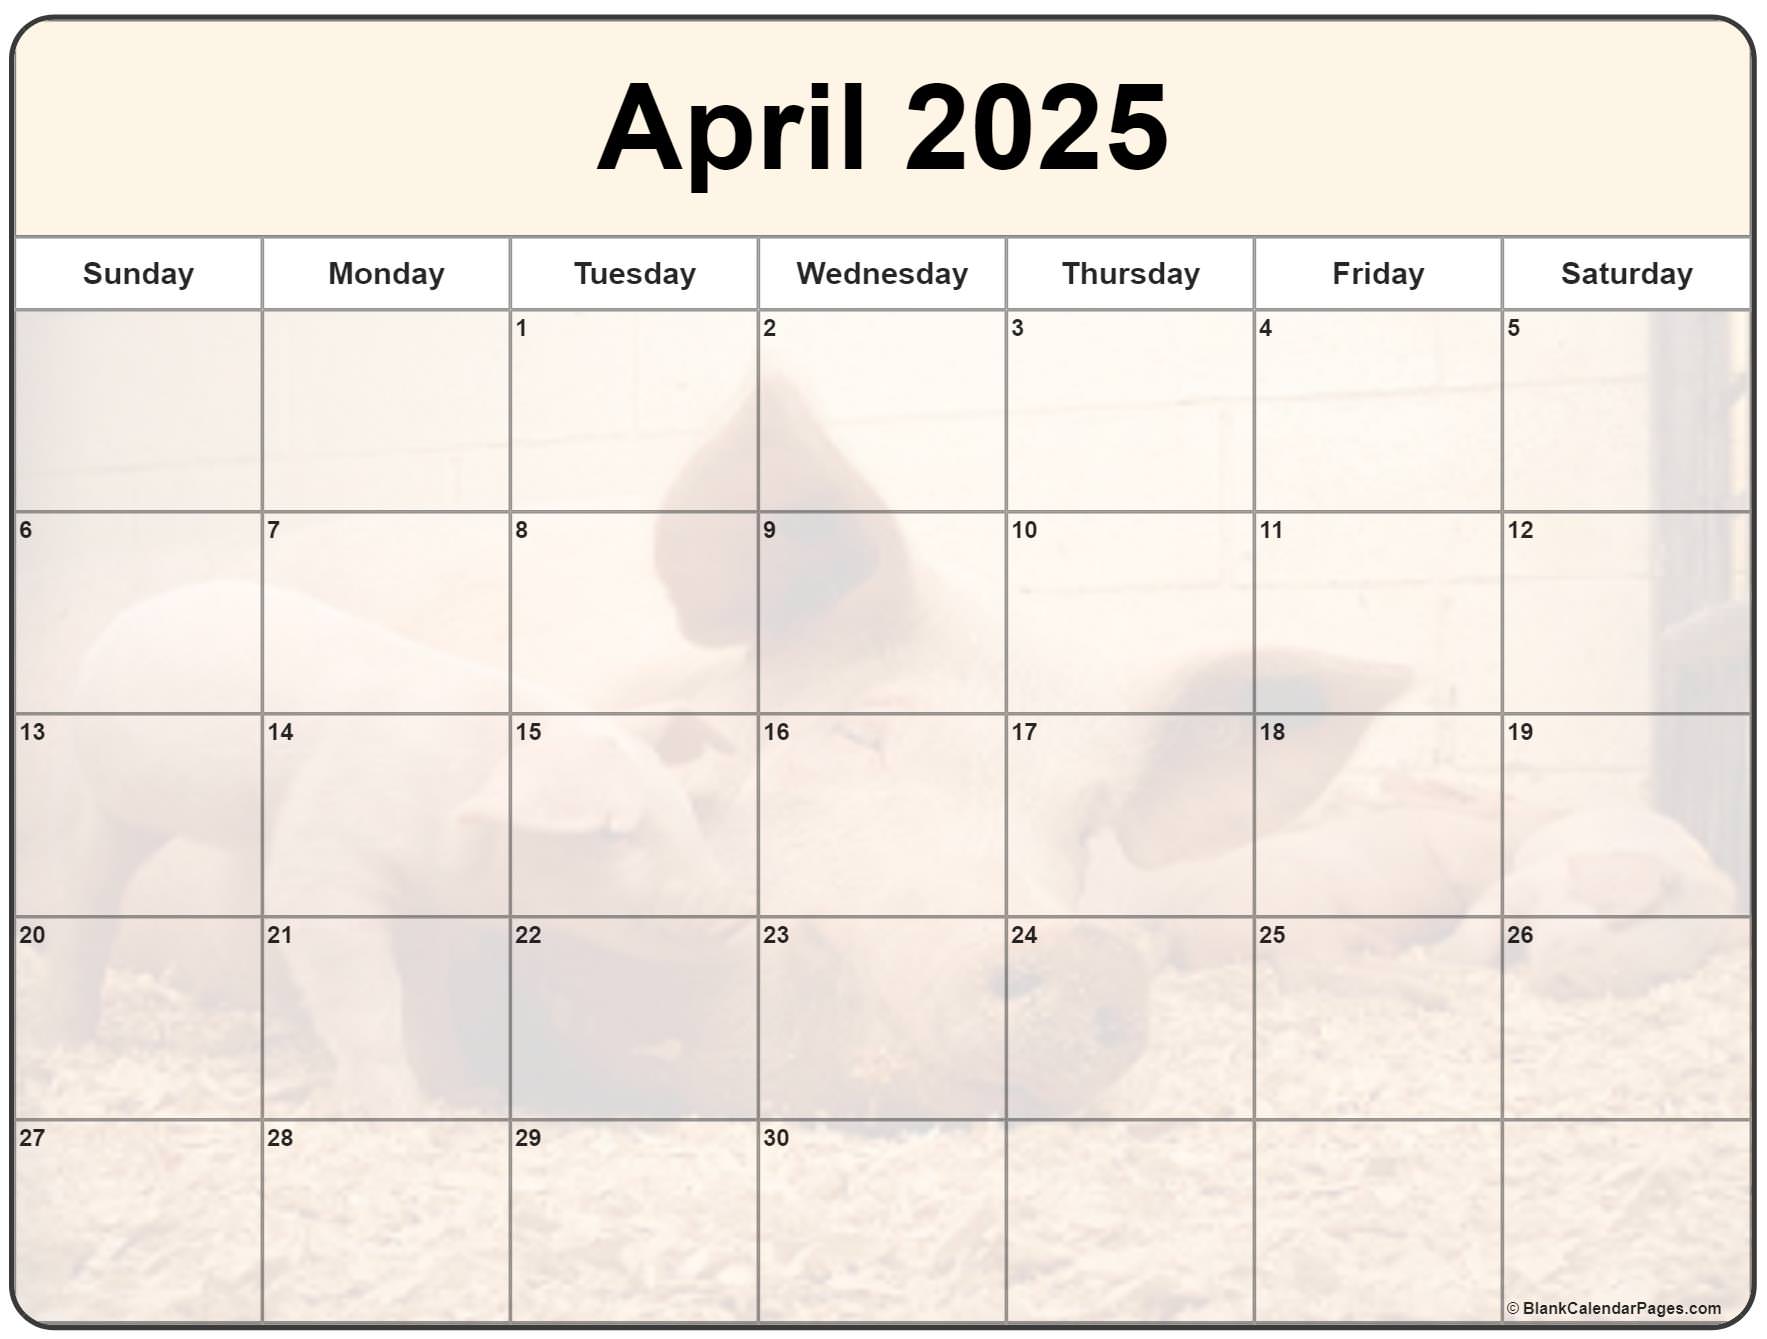 collection-of-april-2025-photo-calendars-with-image-filters